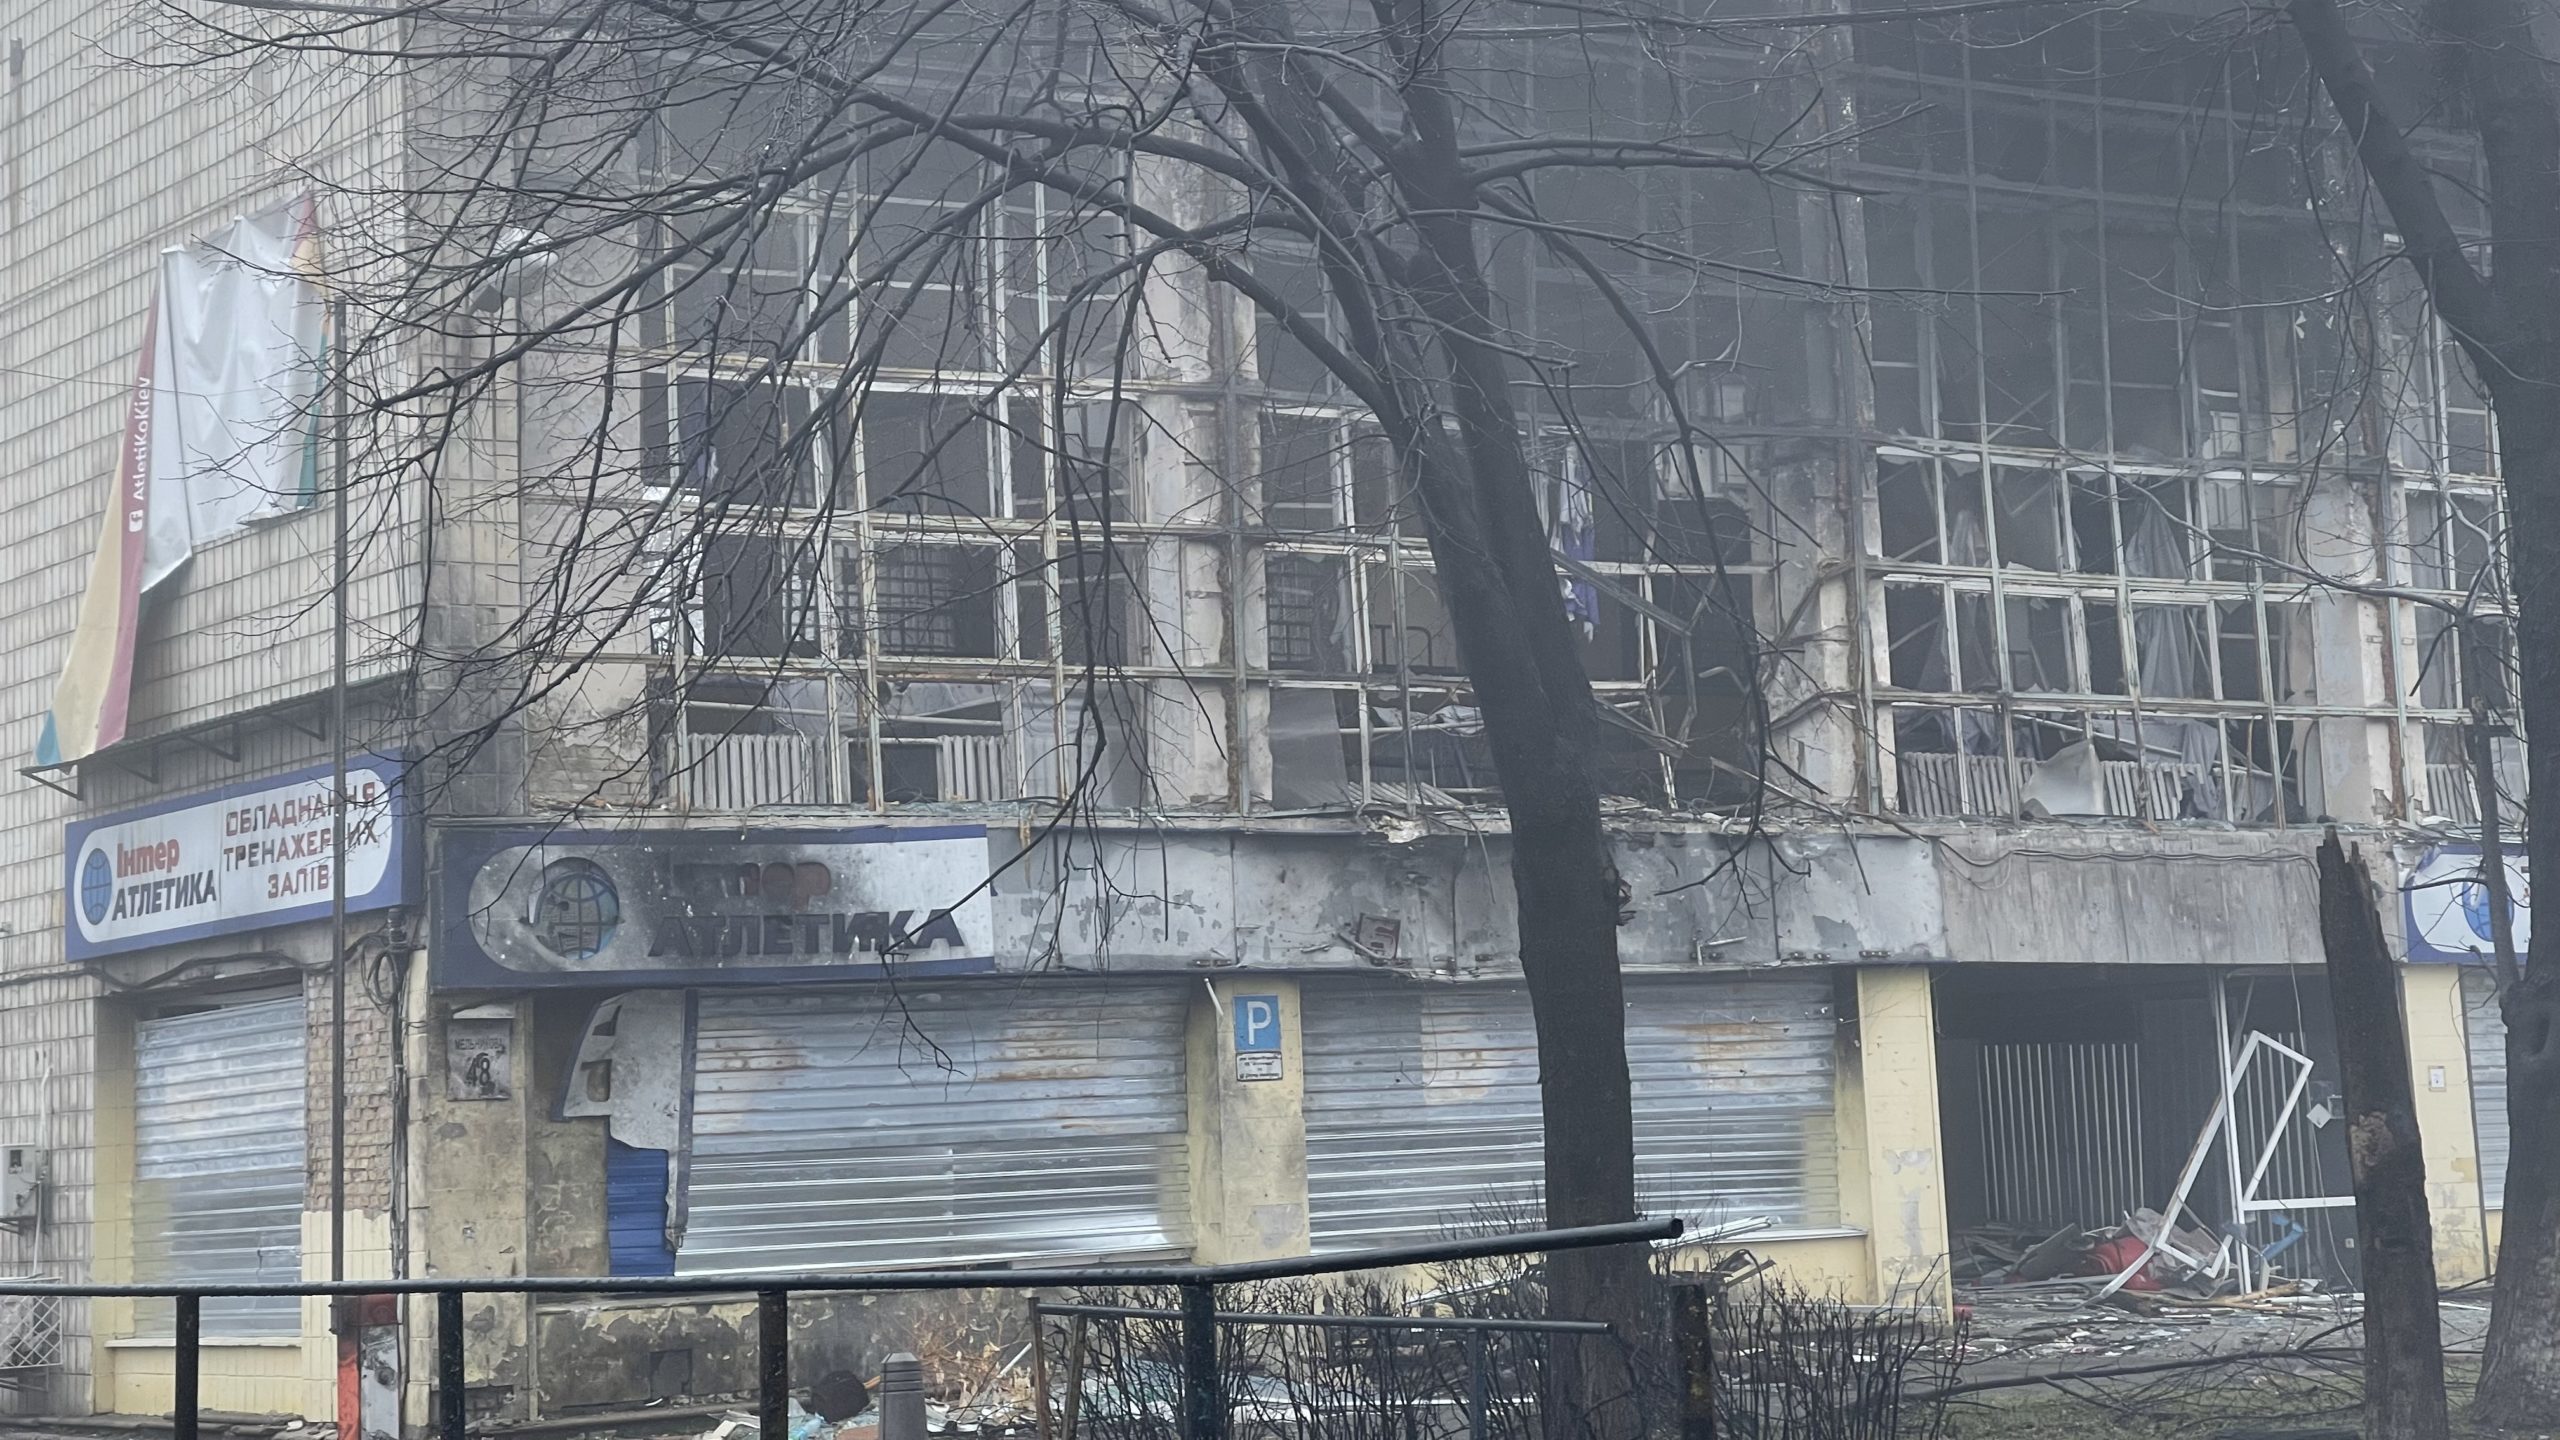 Kyiv Deserted as Ukraine’s Forces Recapture Capital (with VIDEO)